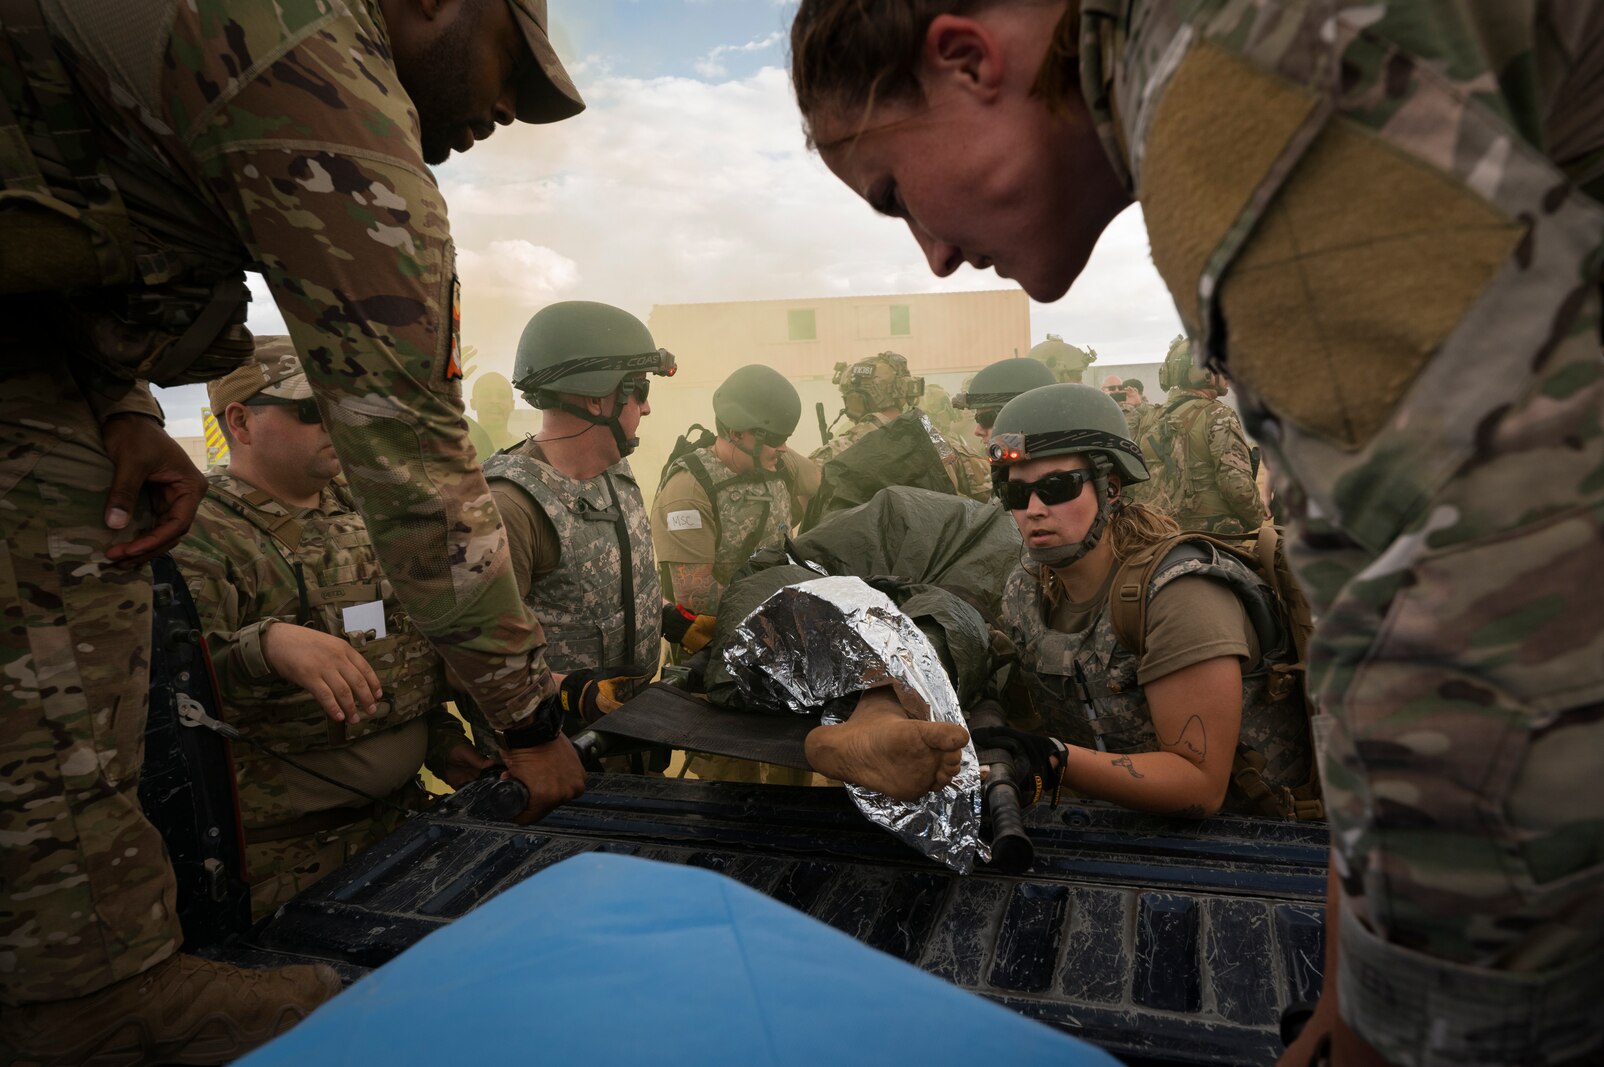 Several uniformed military personnel work together to load a stretcher with a medical mannequin on it into the back of a truck bed.